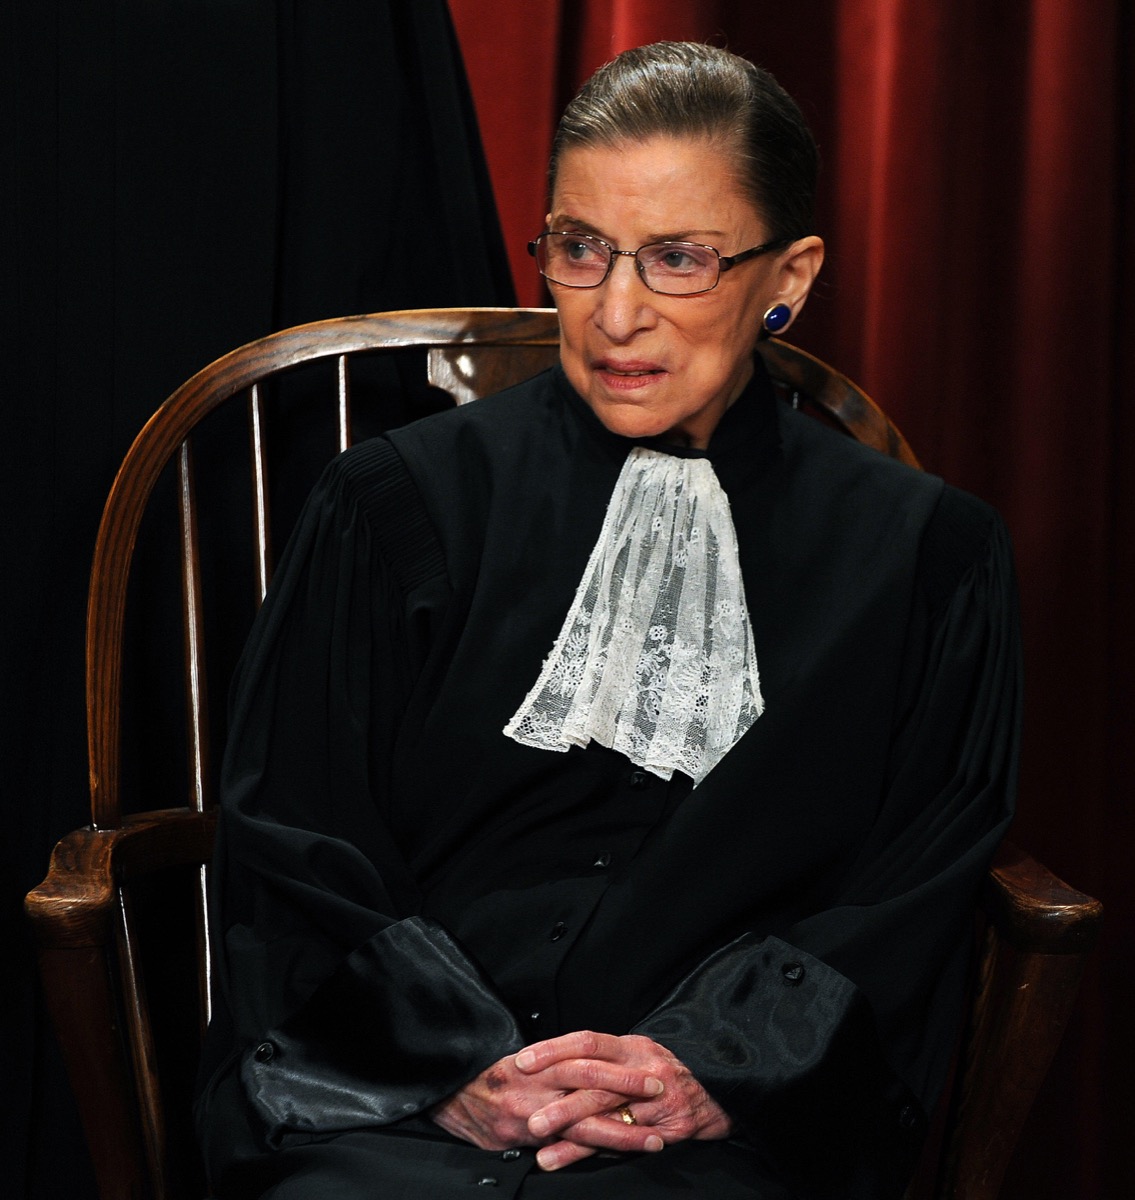 Ruth Bader Ginsburg, Associate Justice Ruth Bader Ginsburg and the Supreme Court Justices of the United States